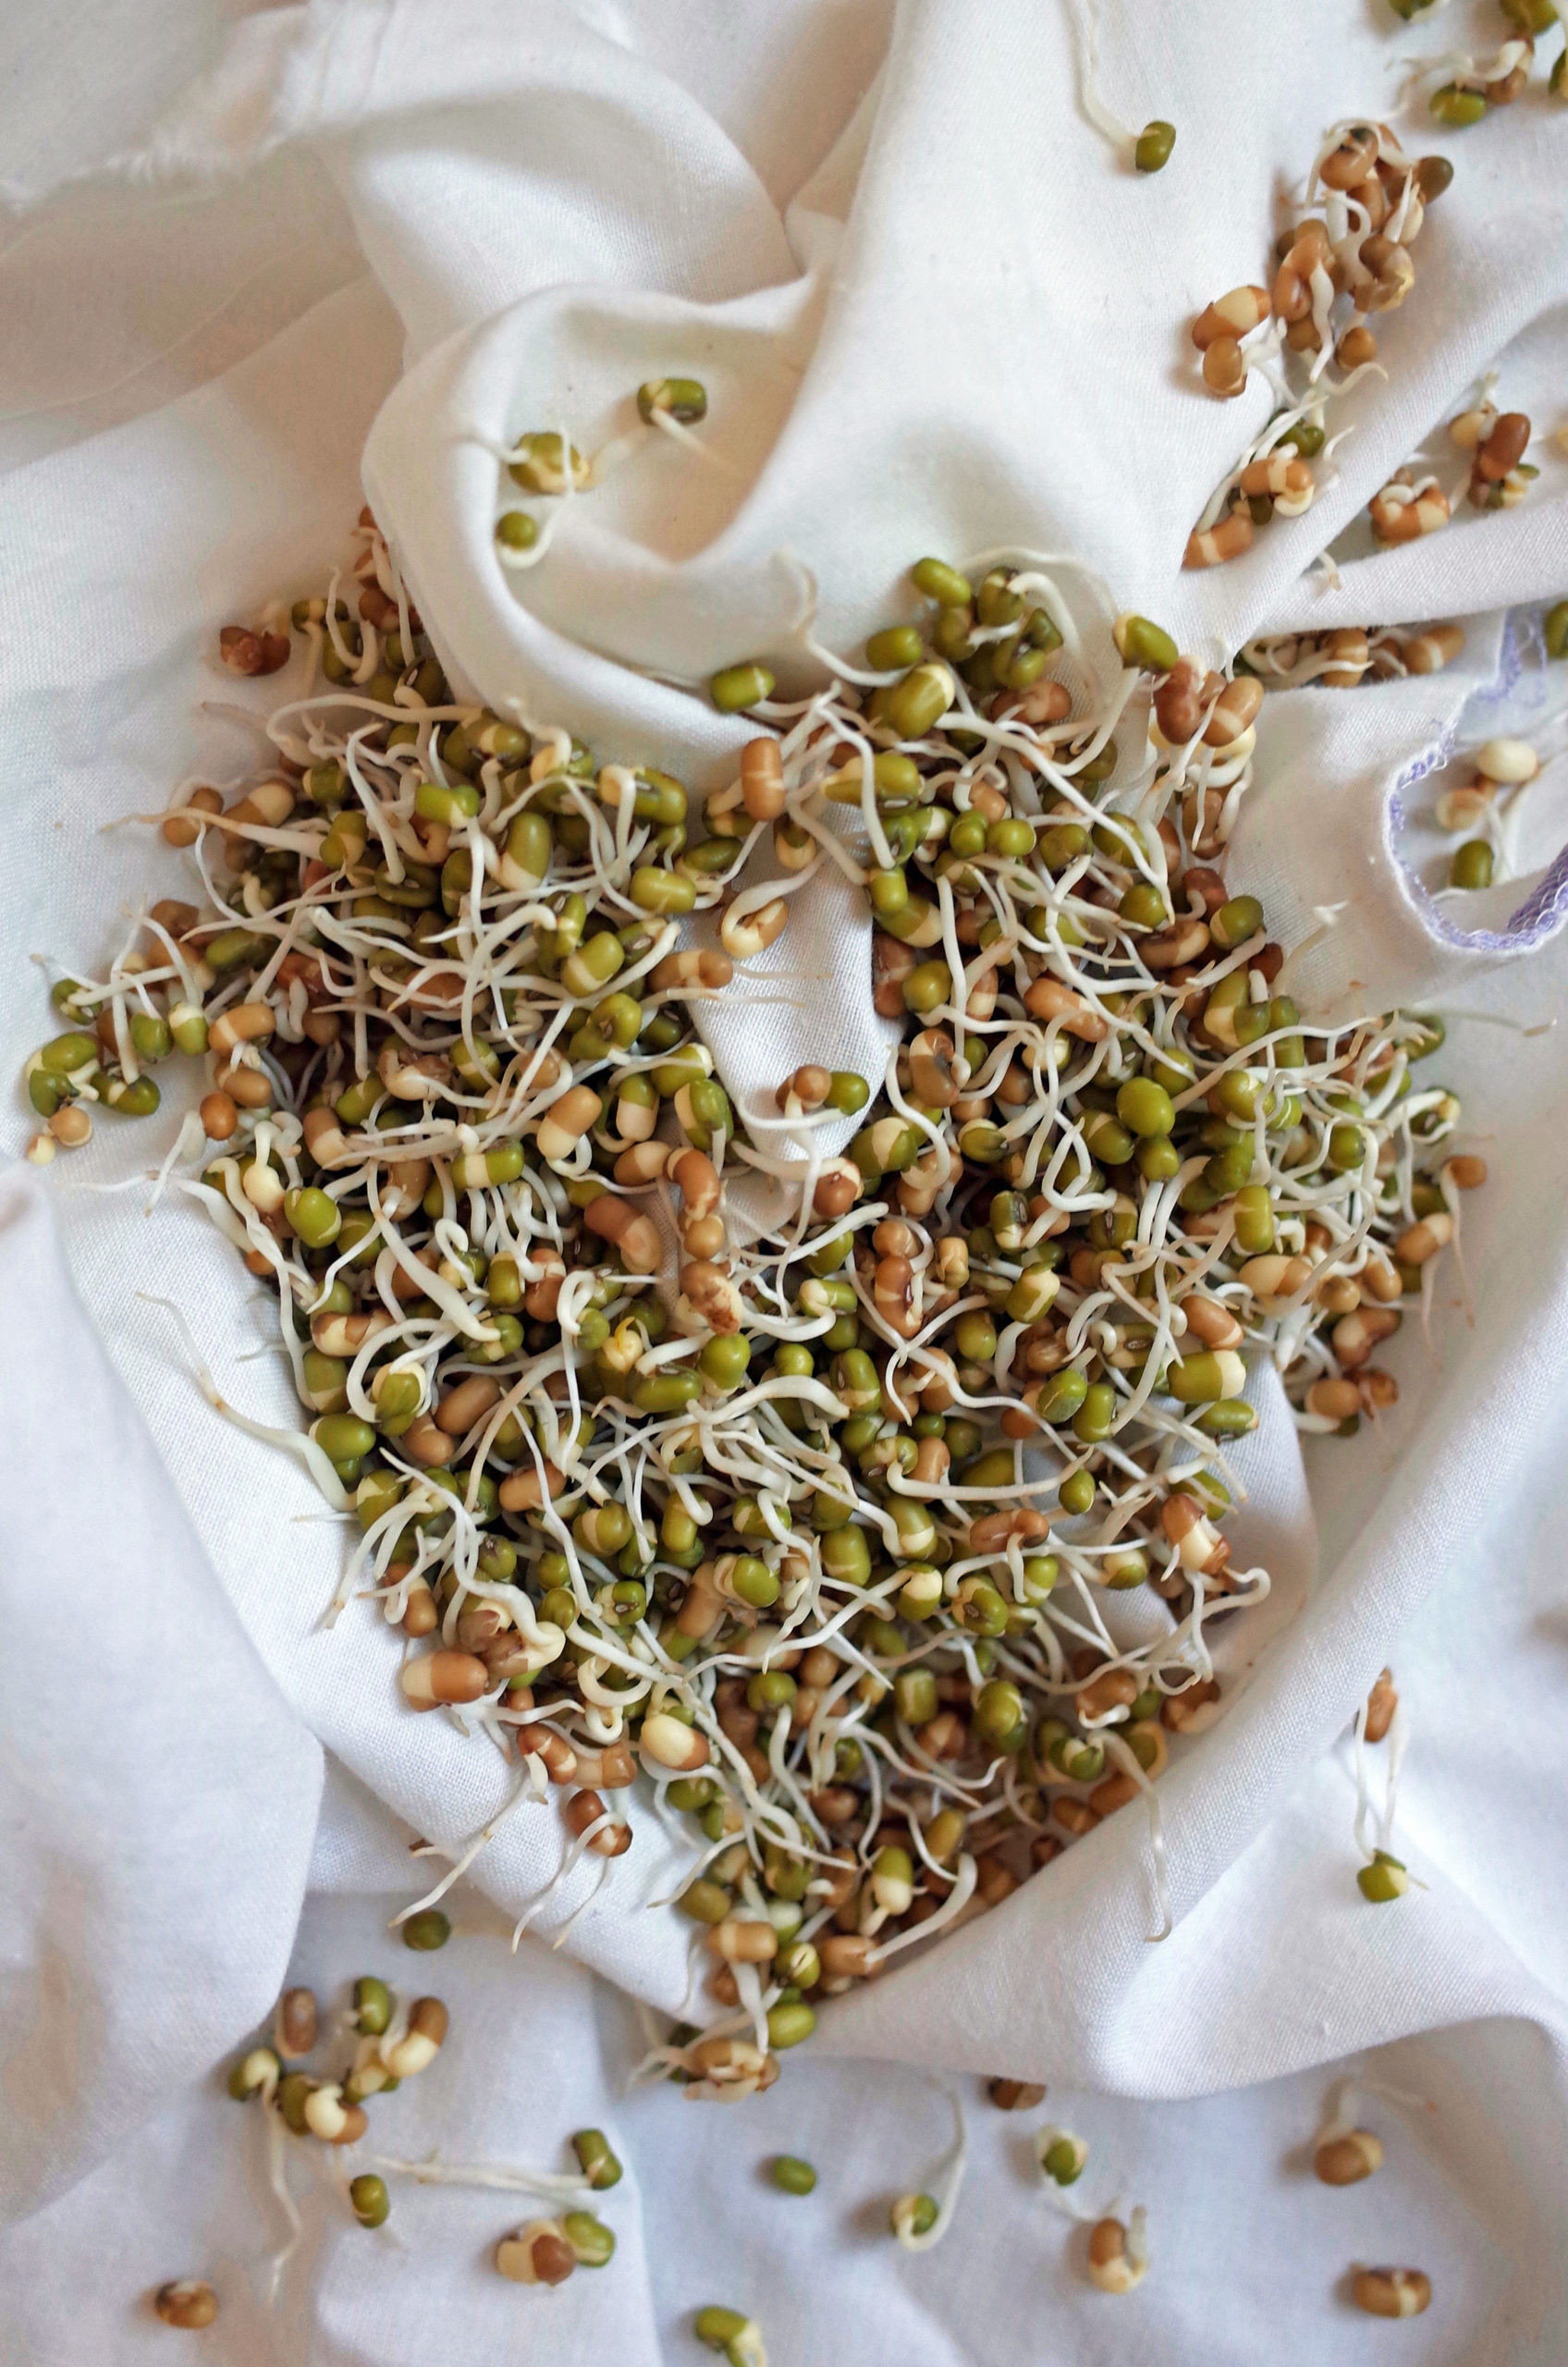 Mixed sprouted whole moong and moth beans on a crumpled white cloth